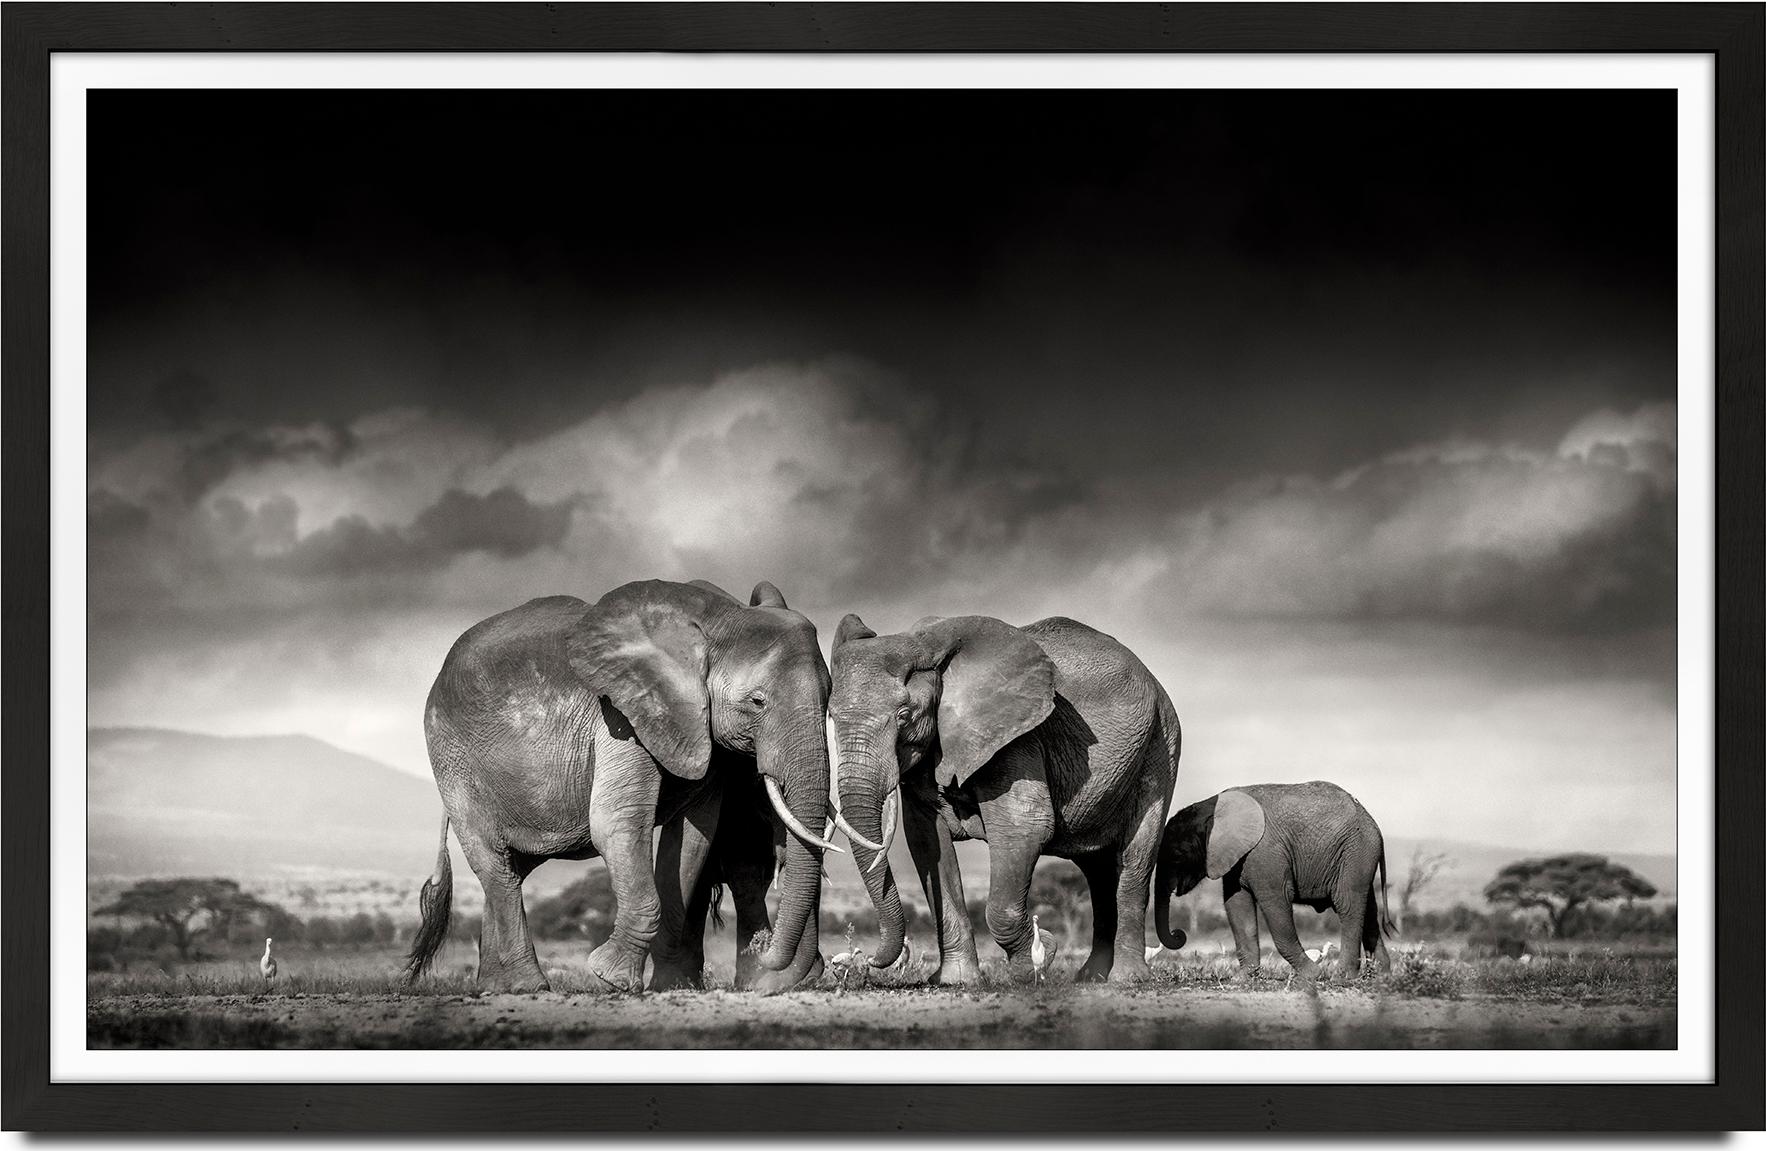 Searching for salt, animal, wildlife, black and white photography, elephant - Photograph by Joachim Schmeisser